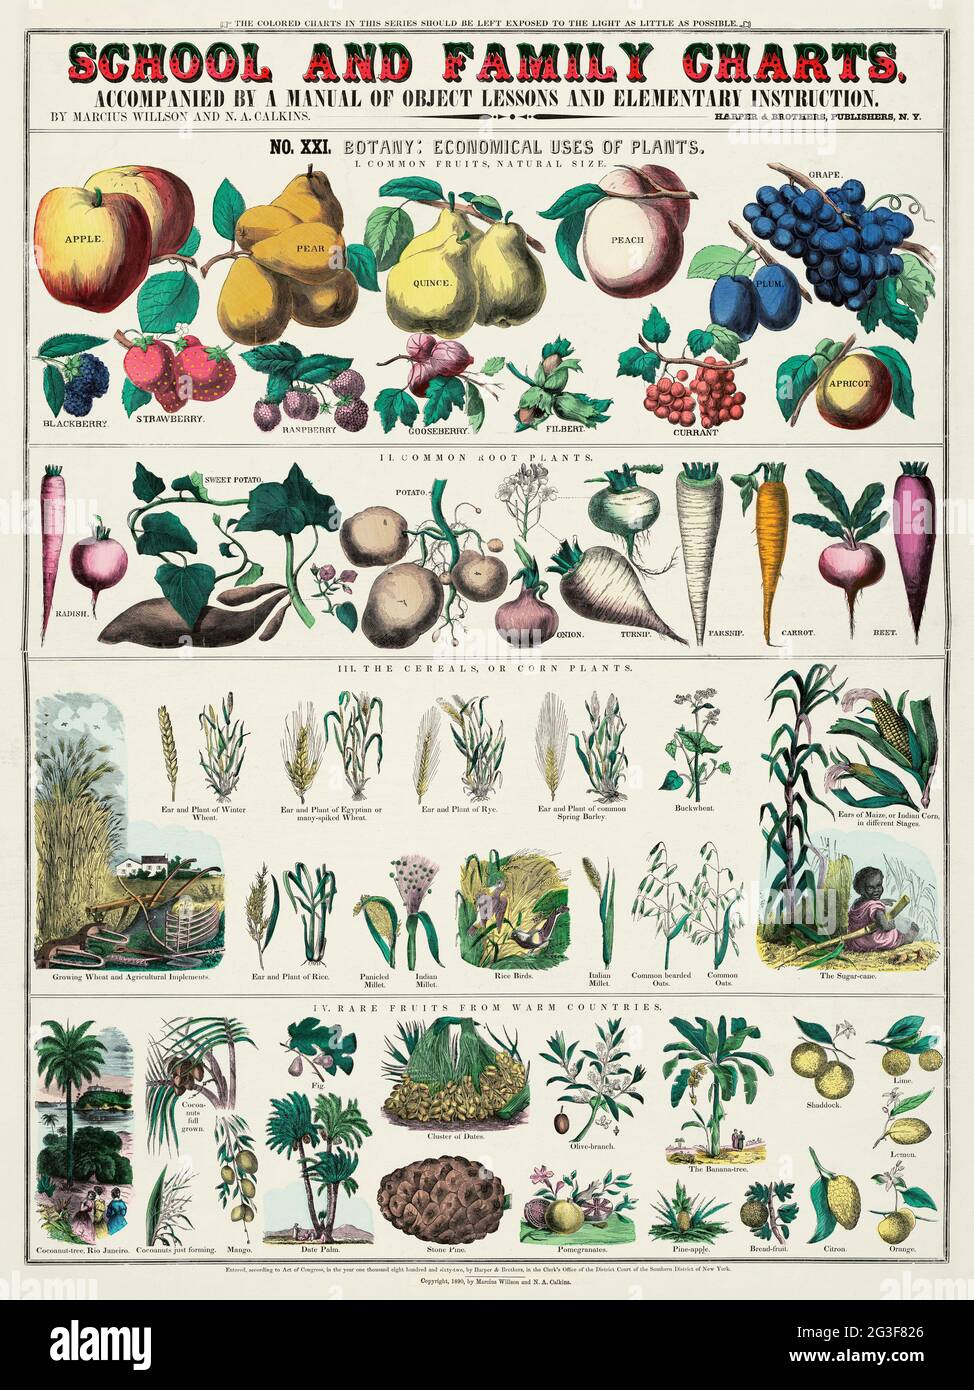 School and Family Charts. Botany: Economical uses of plants. Vintage poster. Stock Photo